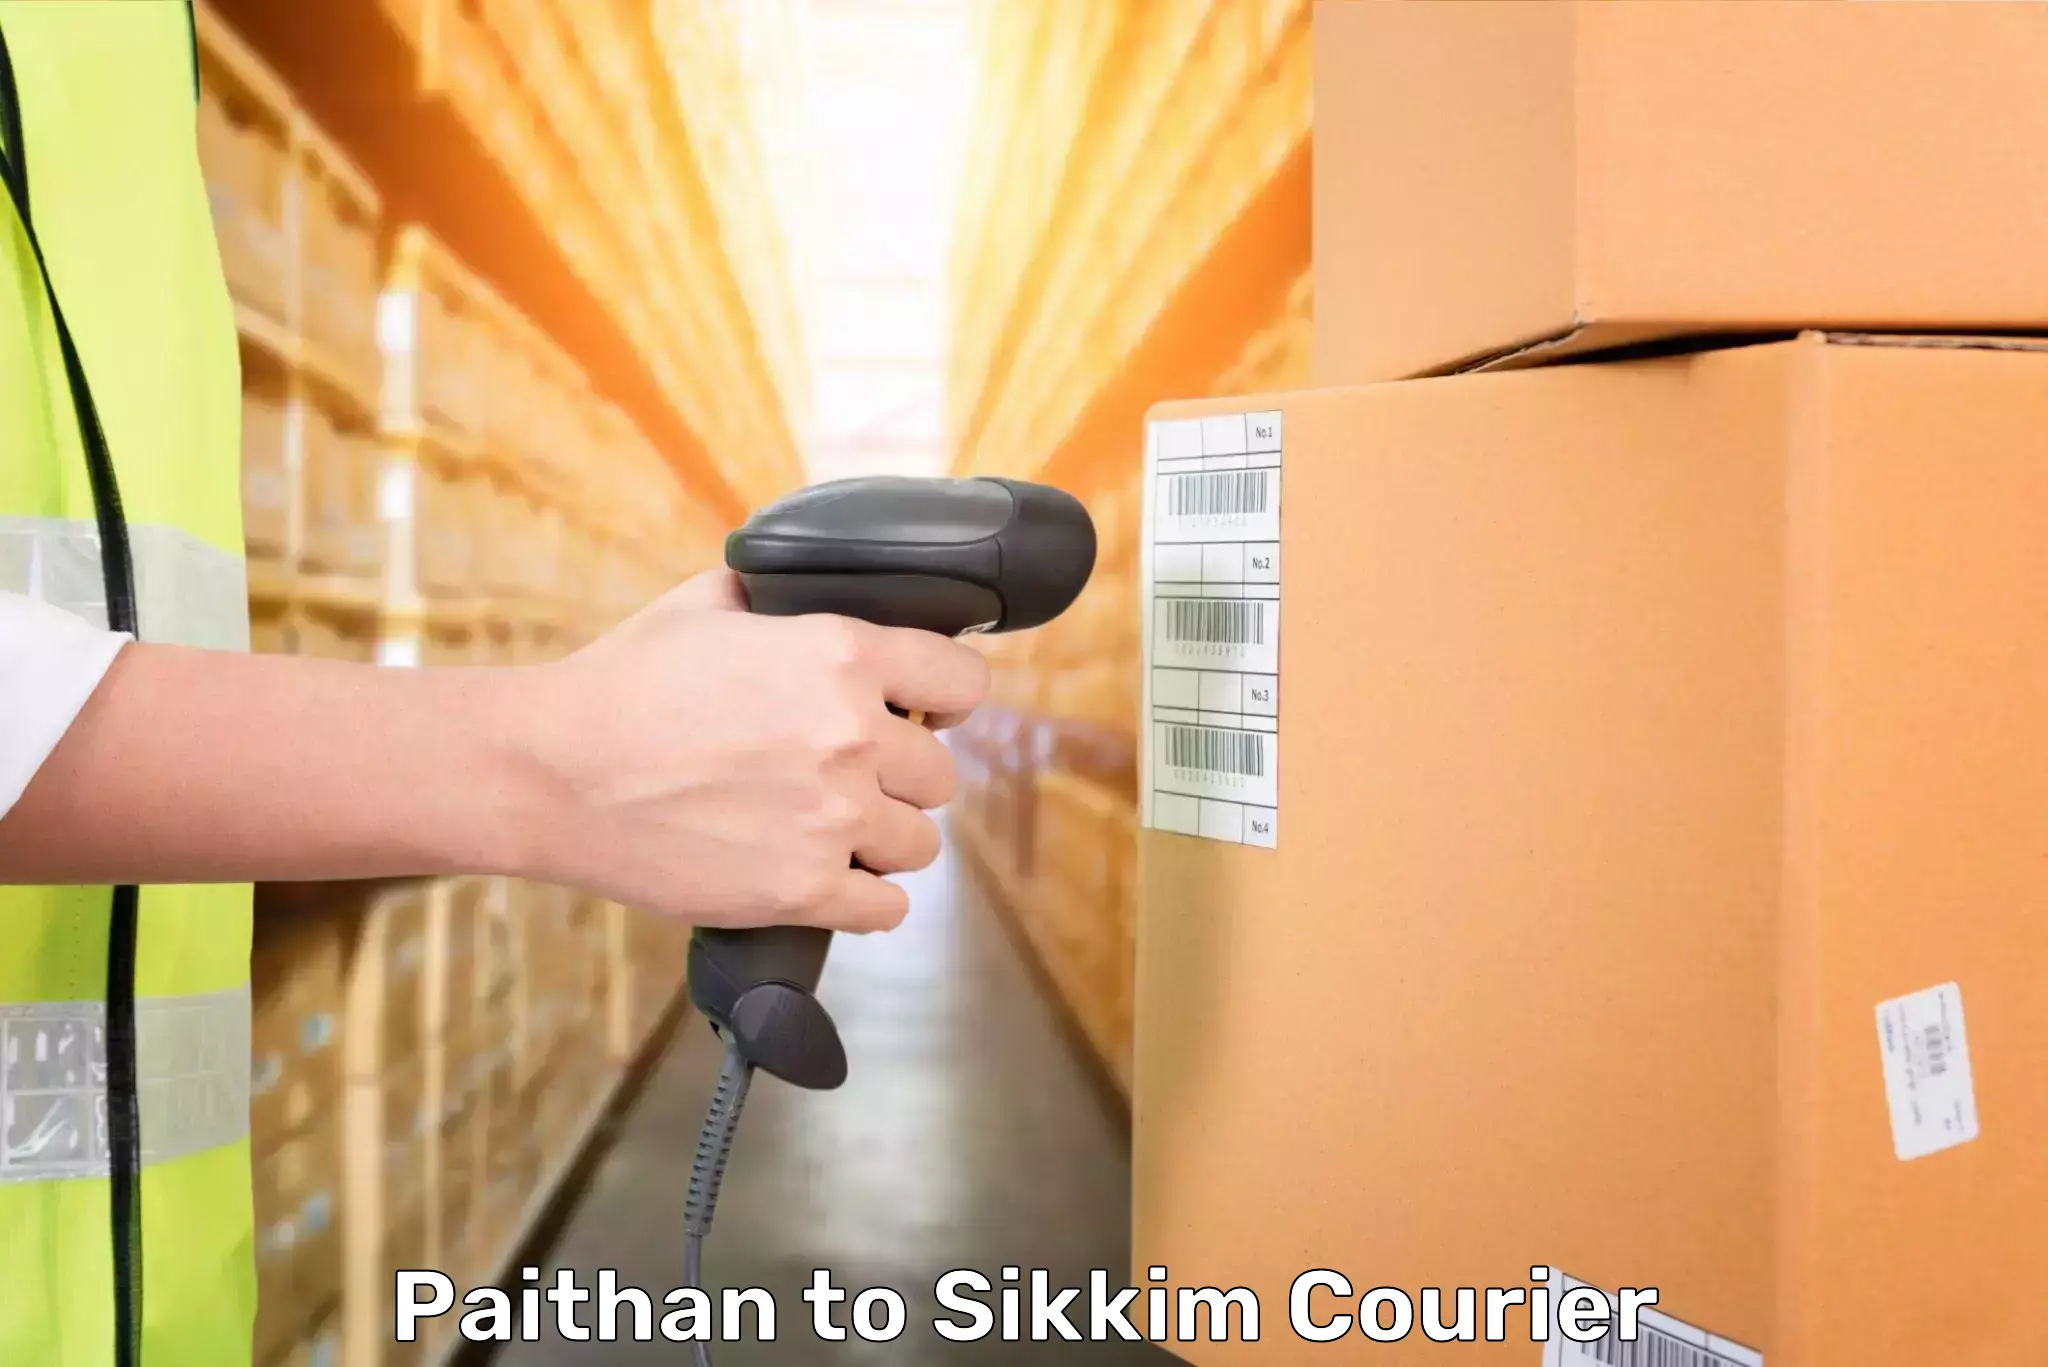 Luggage shipment specialists Paithan to Pelling